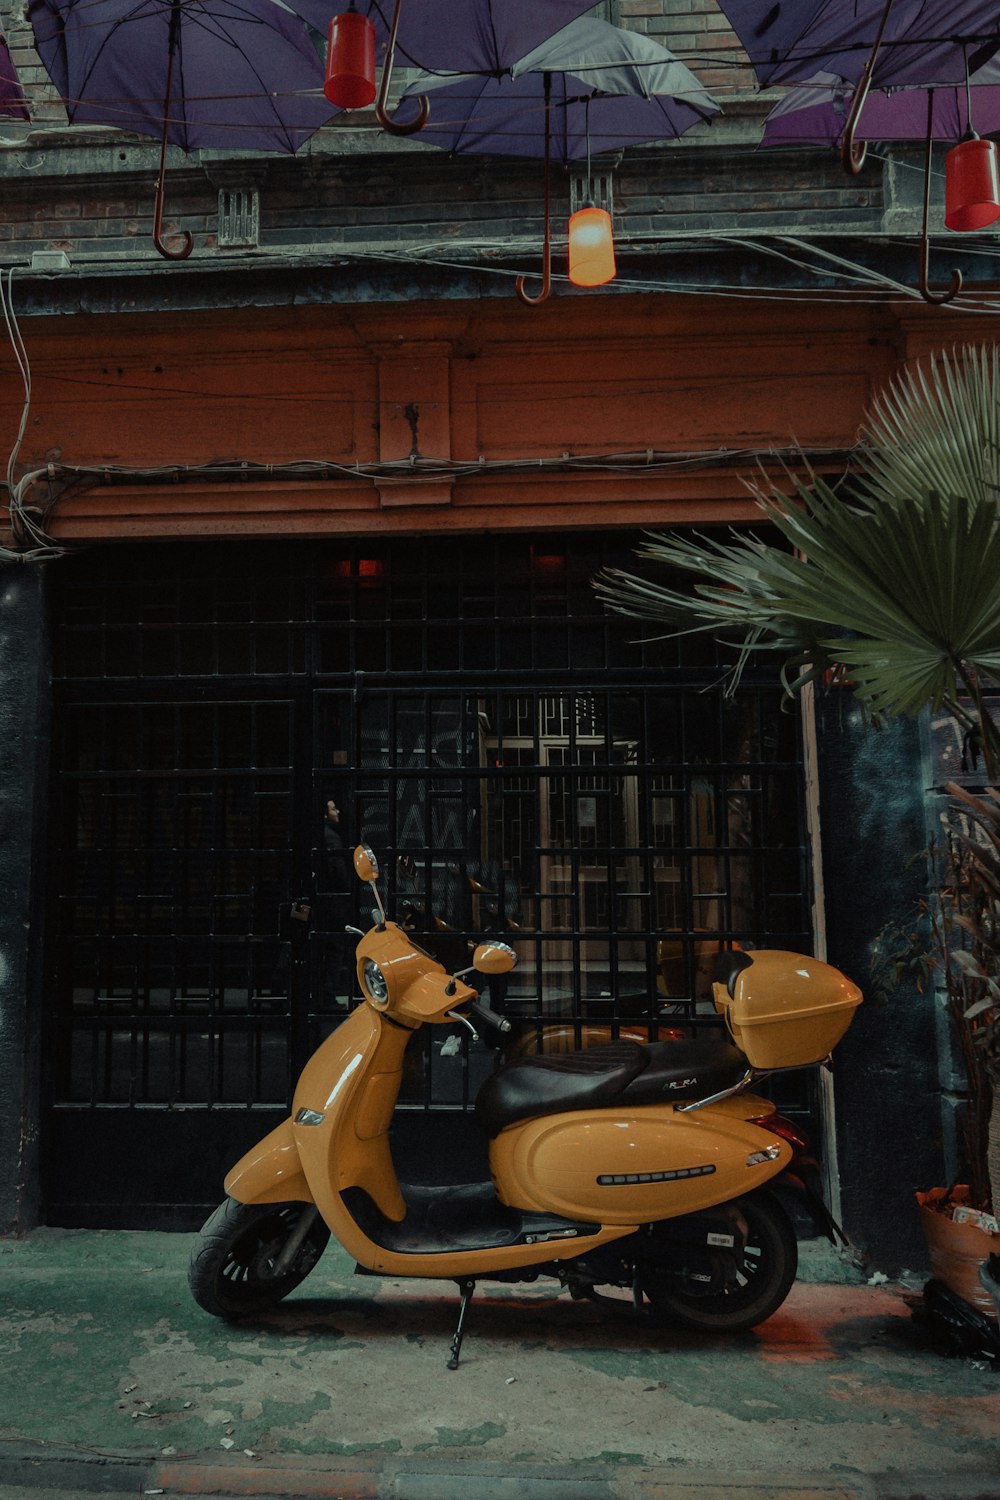 a yellow scooter parked in front of a building